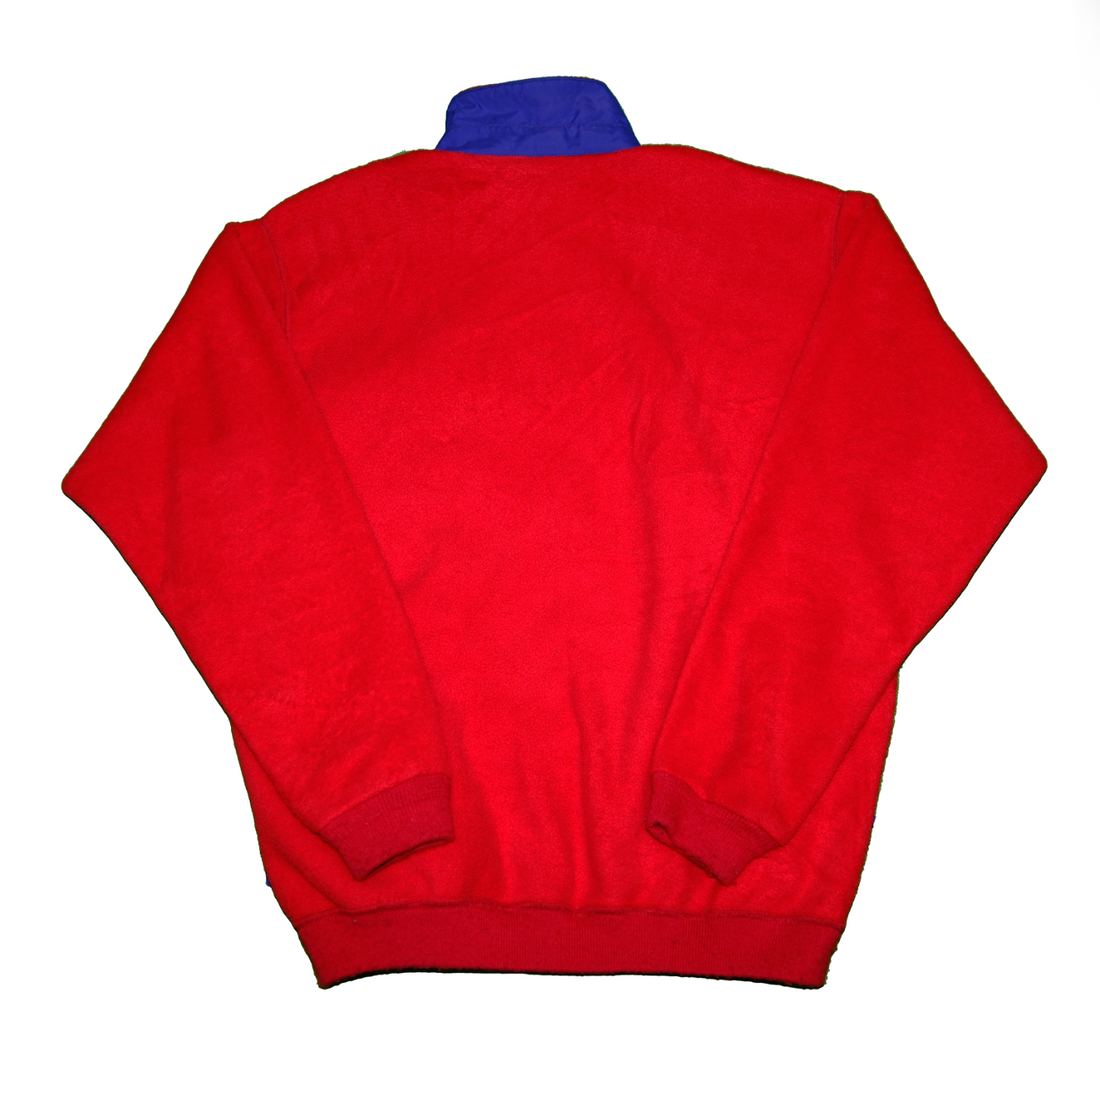 Vintage Patagonia Pullover Fleece Jacket Size Large Red Made USA